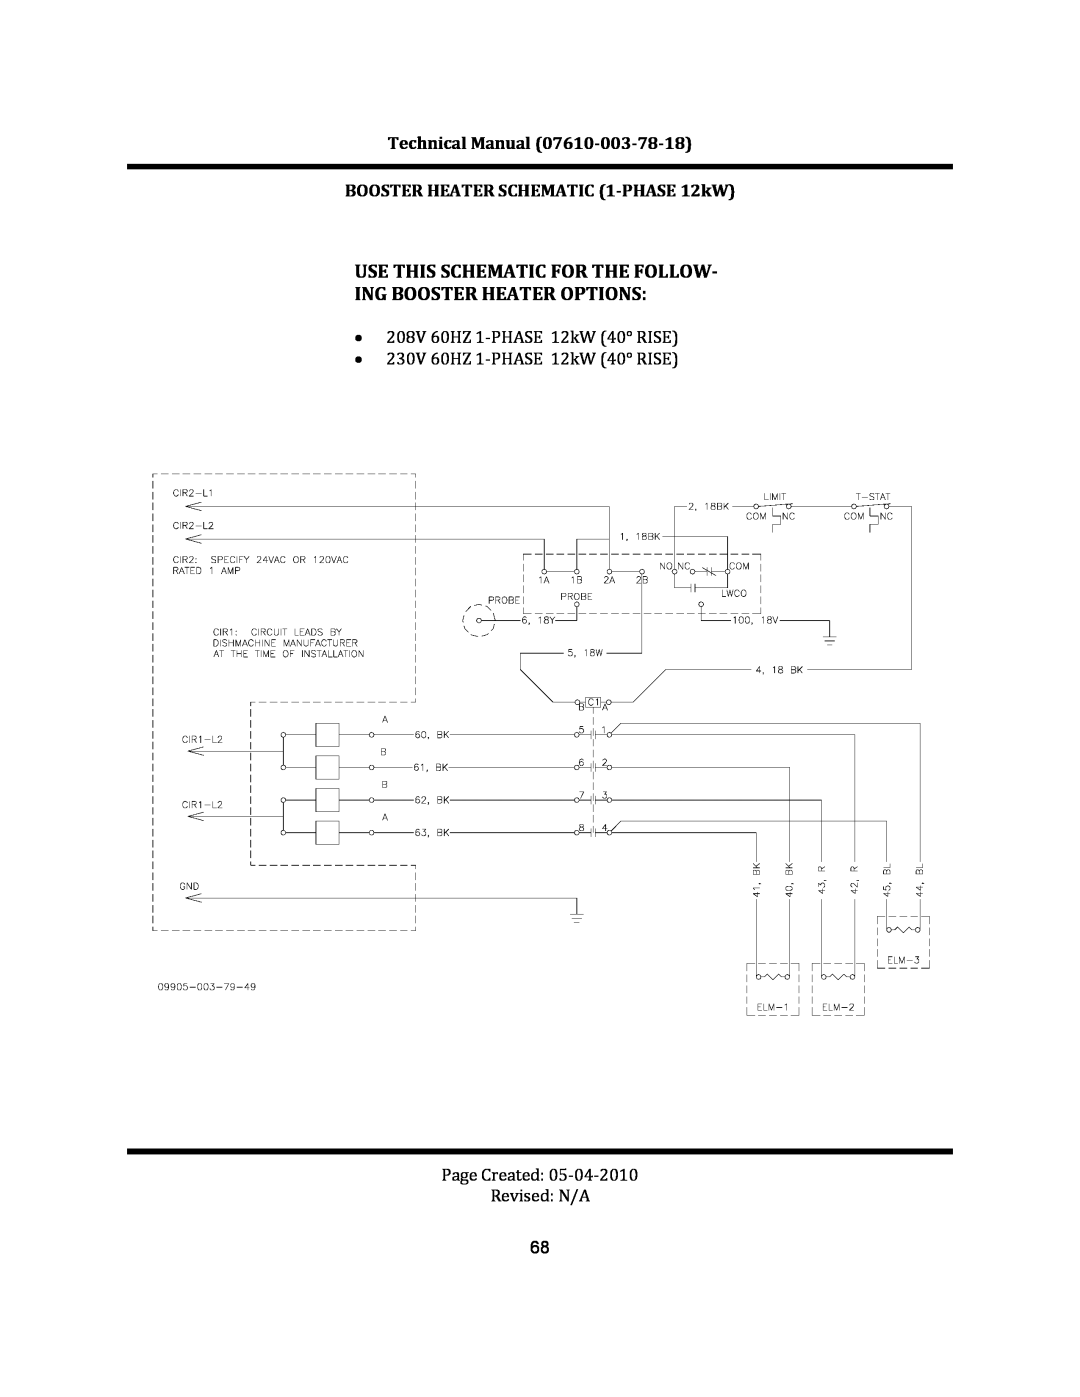 Jackson CREW 66S manual Use This Schematic For The Follow‐ Ing Booster Heater Options, Technical Manual 07610‐003‐78‐18 